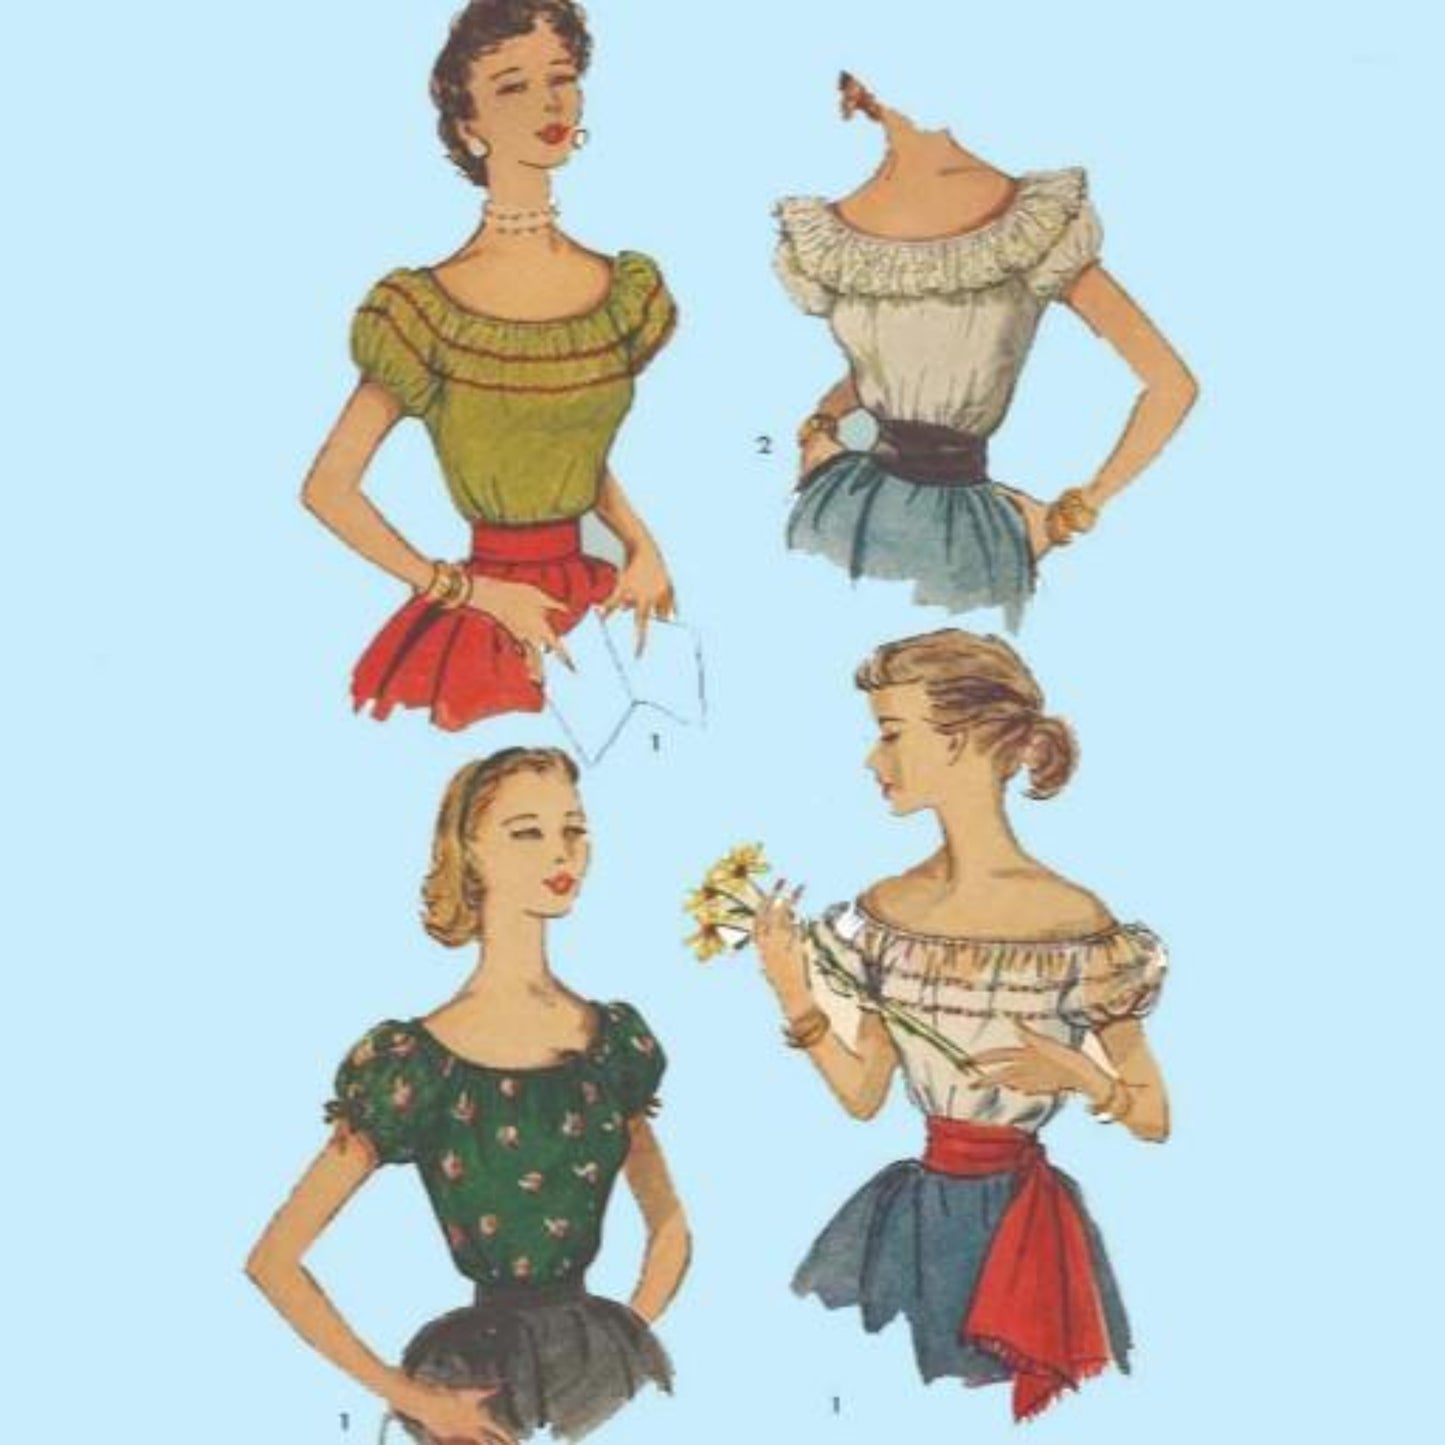 Four woman with four styles of gypsy peasant top blouses.